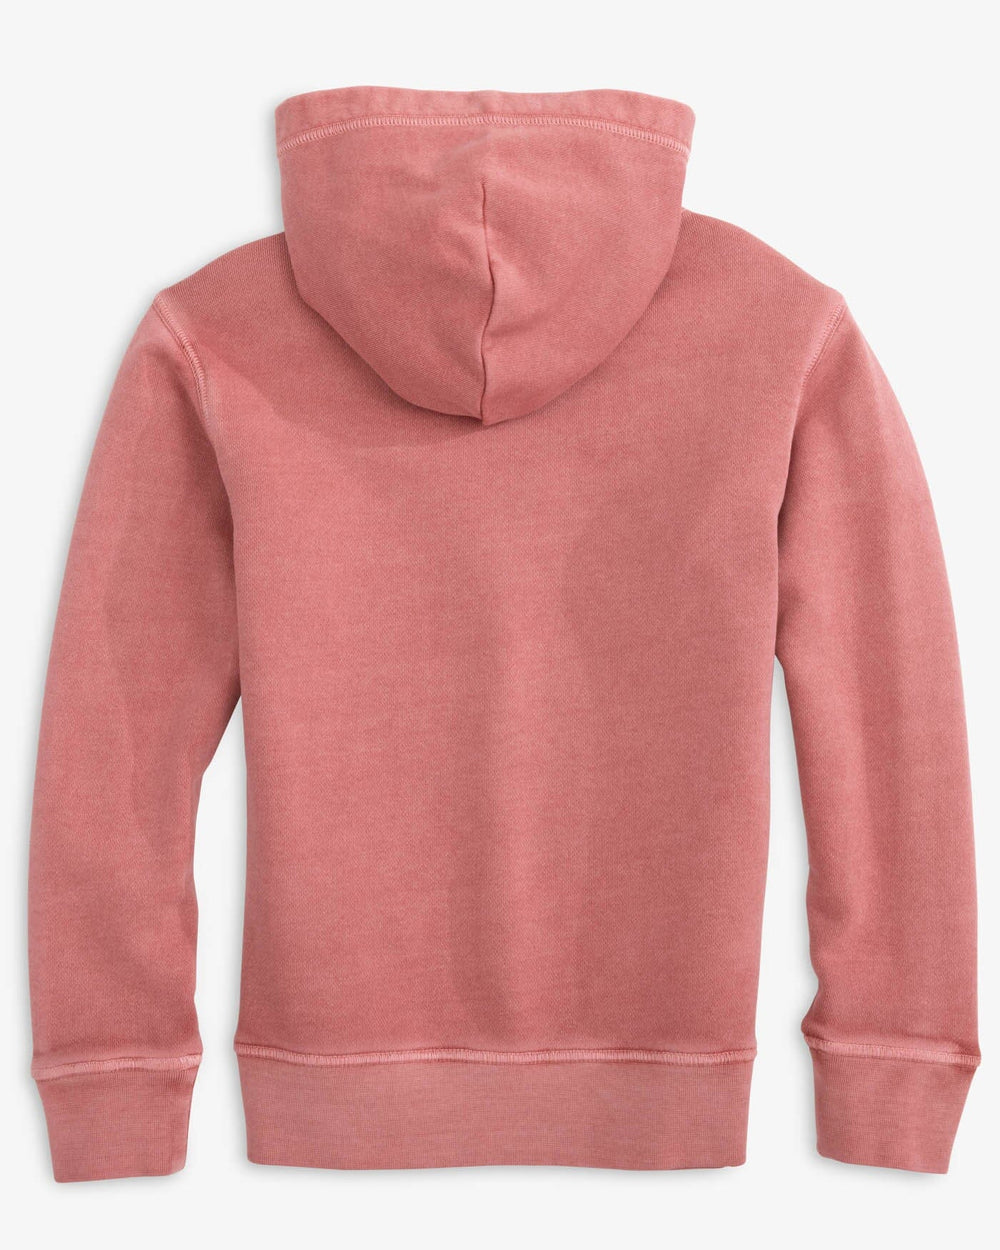 The back view of the Southern Tide Kids Sun Farer Upper Deck Long Sleeve Hoodie by Southern Tide - Dusty Coral